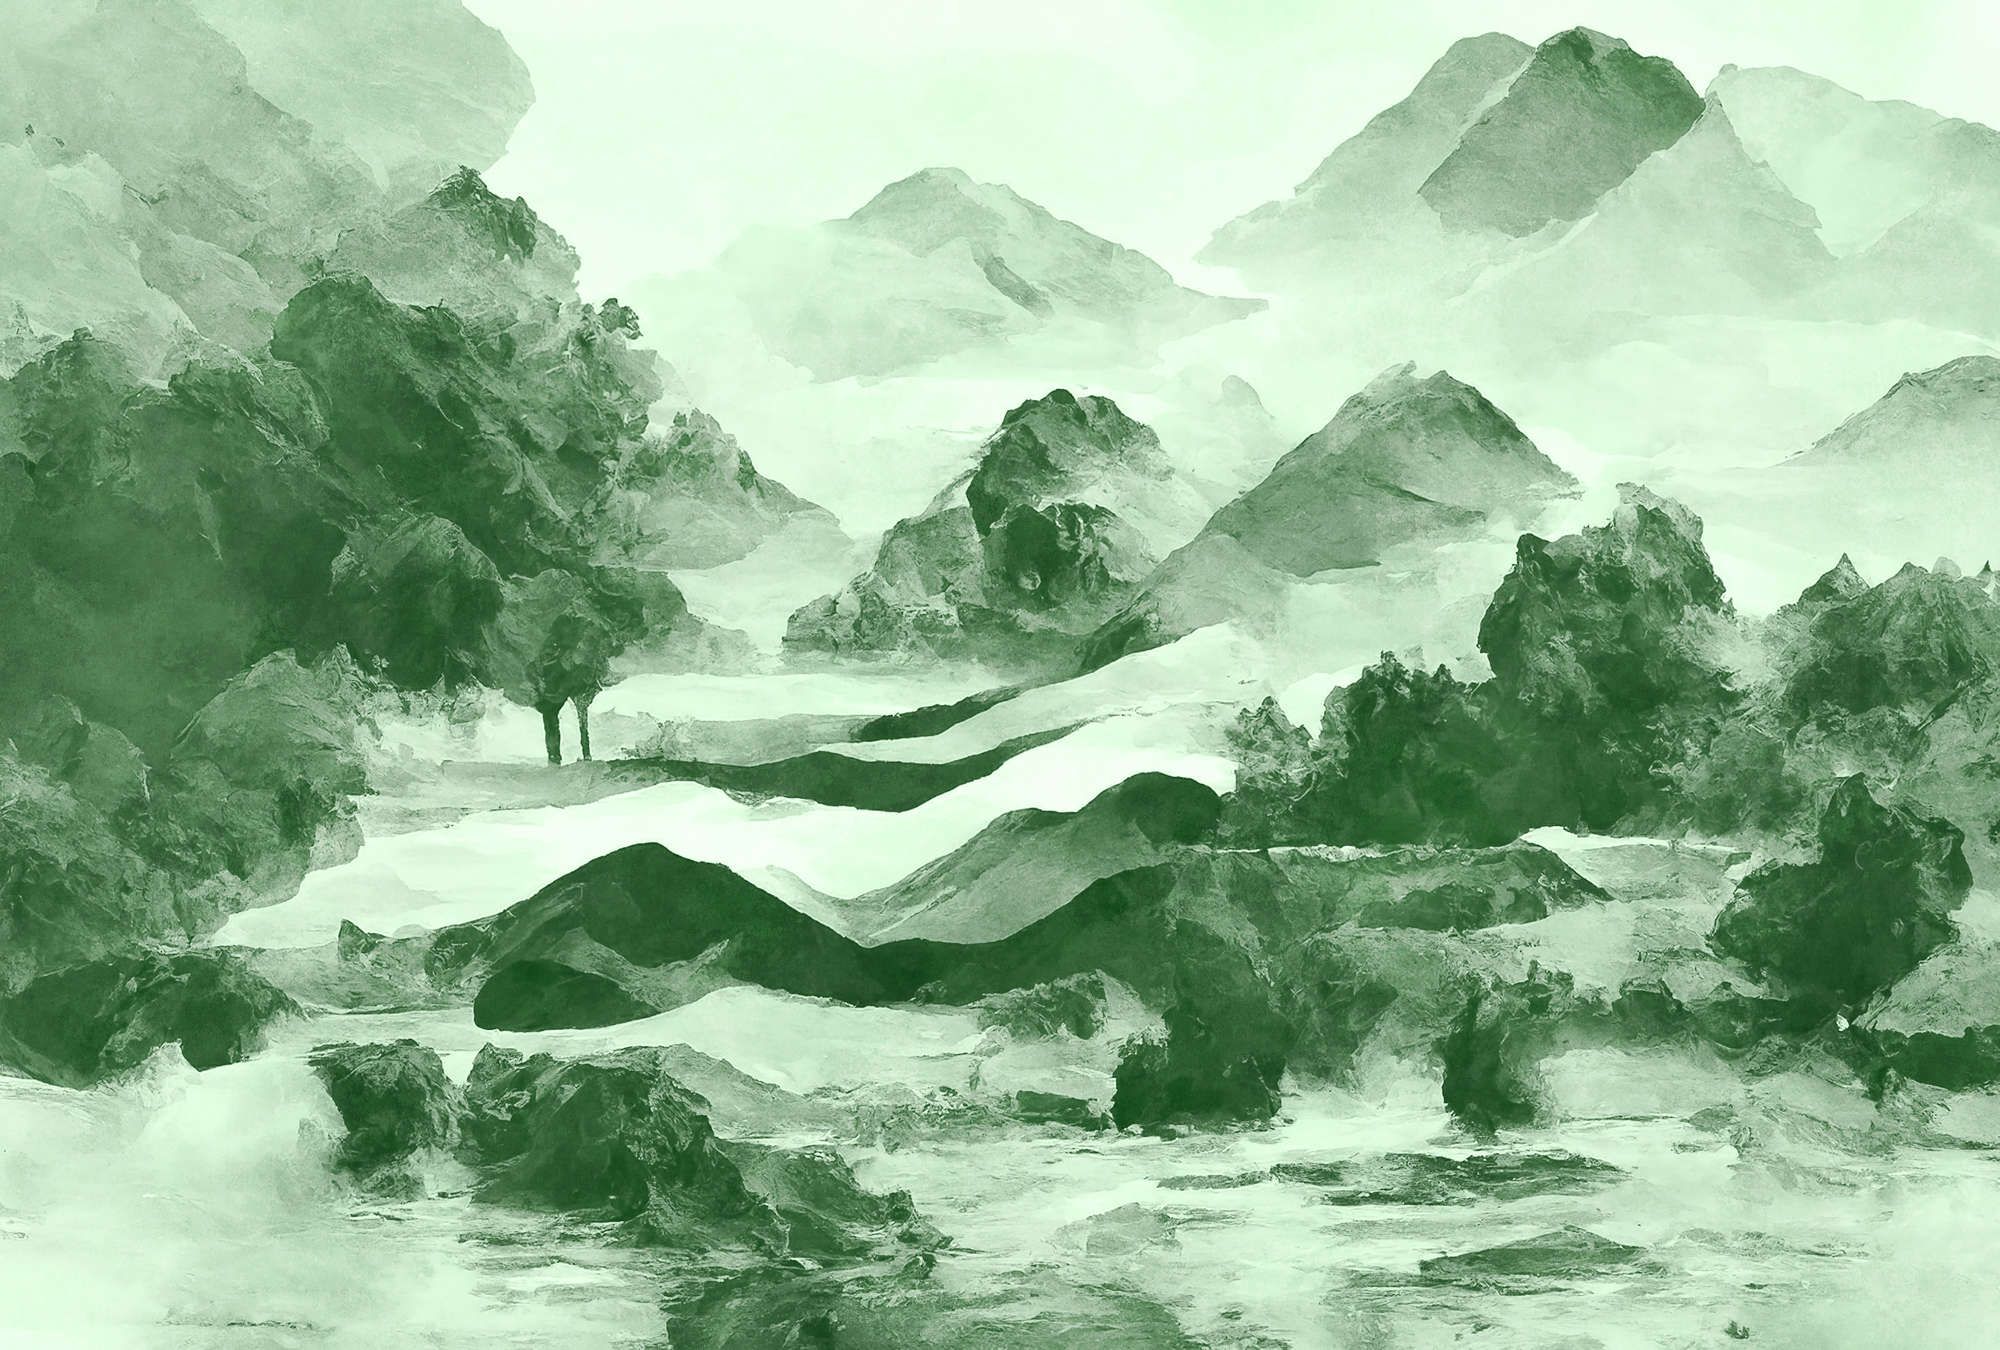             Photo wallpaper »tinterra 2« - Landscape with mountains & fog - Green | Smooth, slightly pearly shimmering non-woven fabric
        